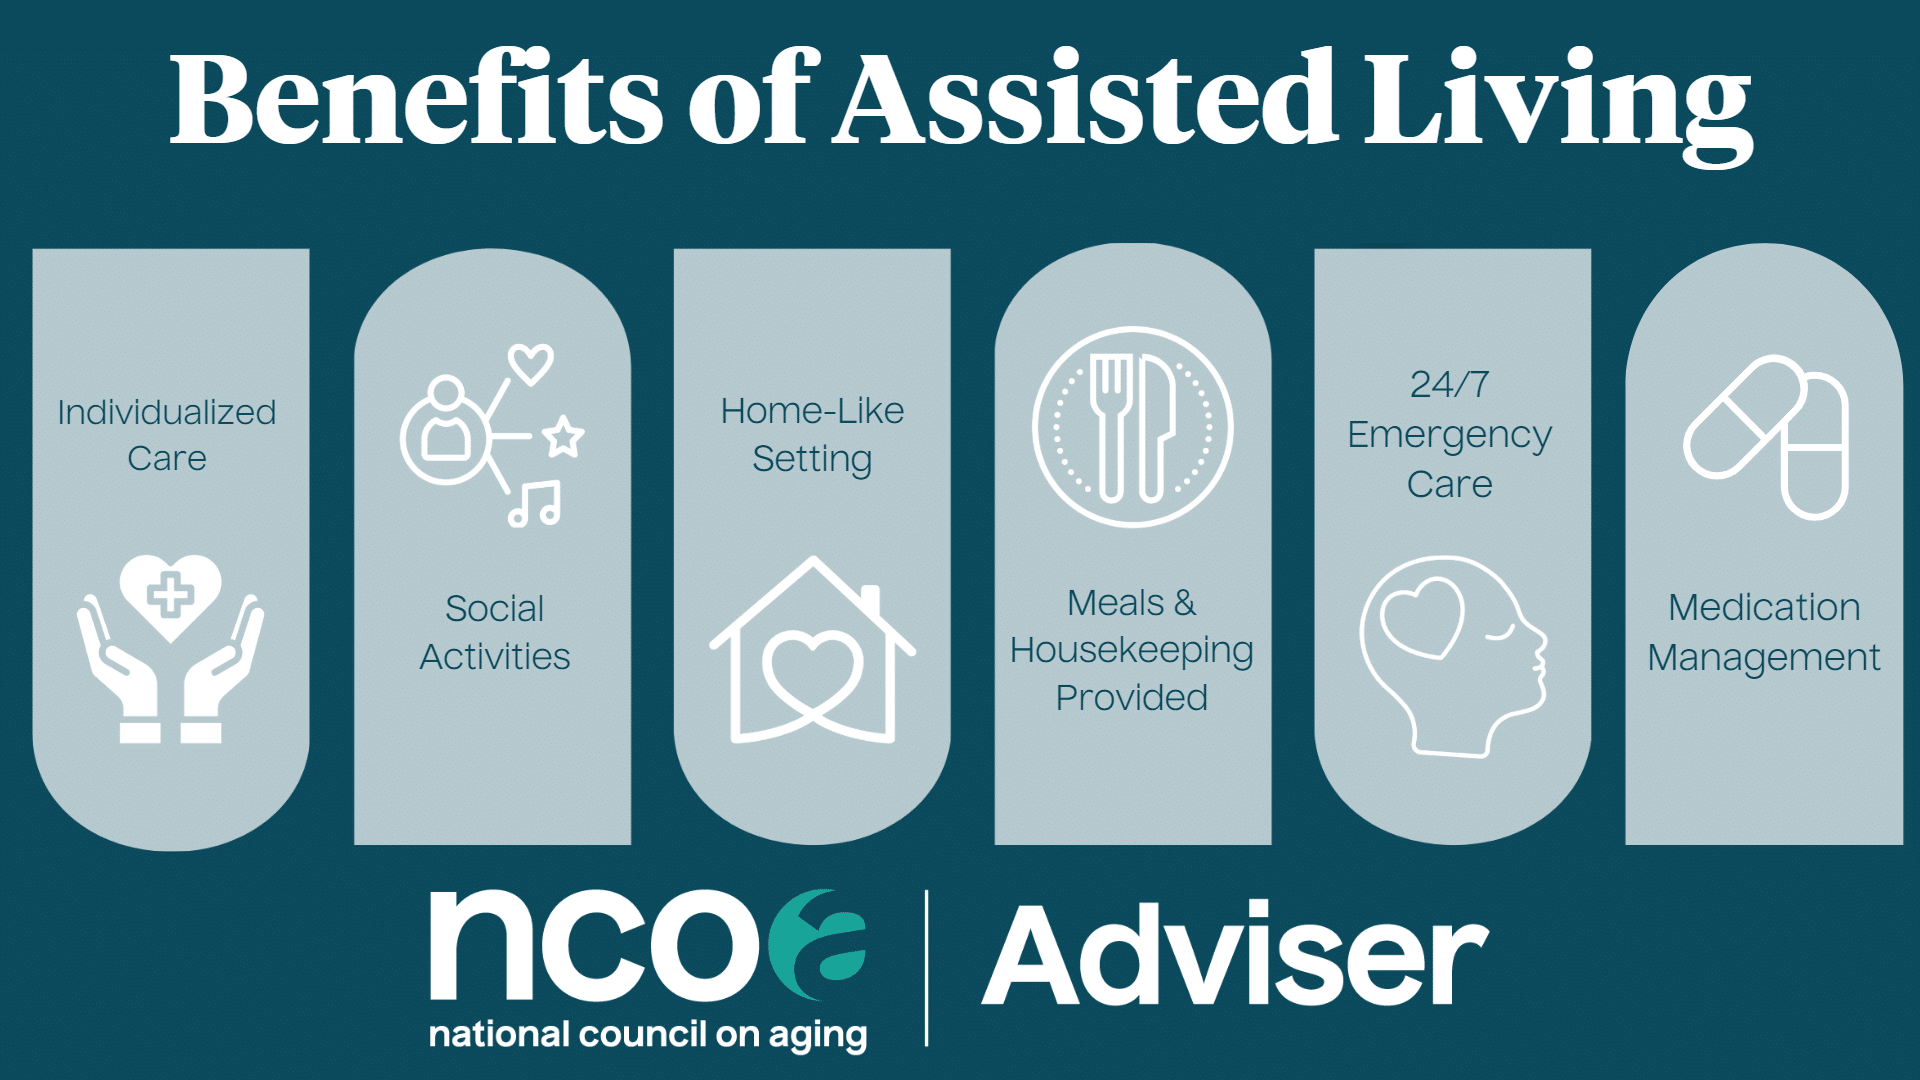 Six benefits of assisted living facilities for older adults and their caregivers